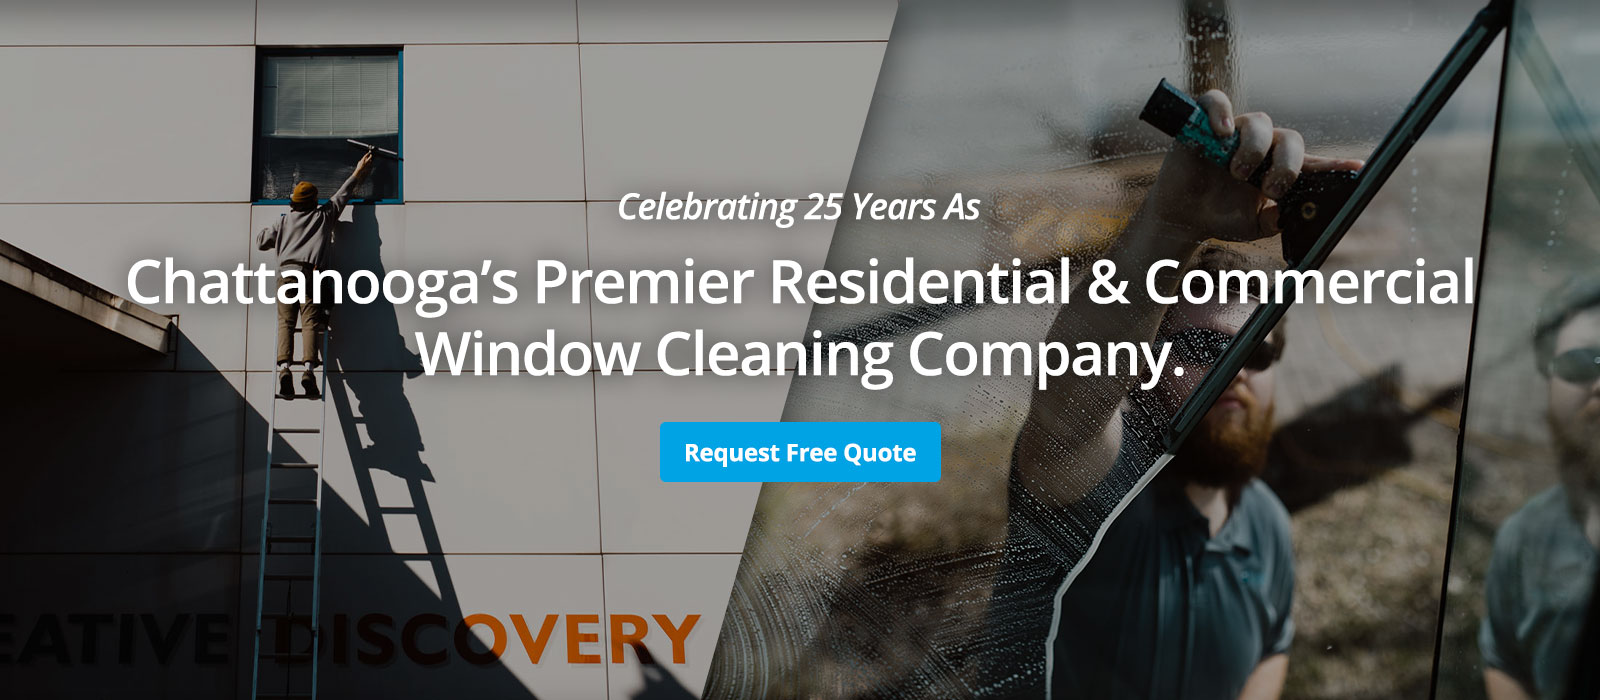 window cleaning chattanooga window washing gutter cleaning high-rise